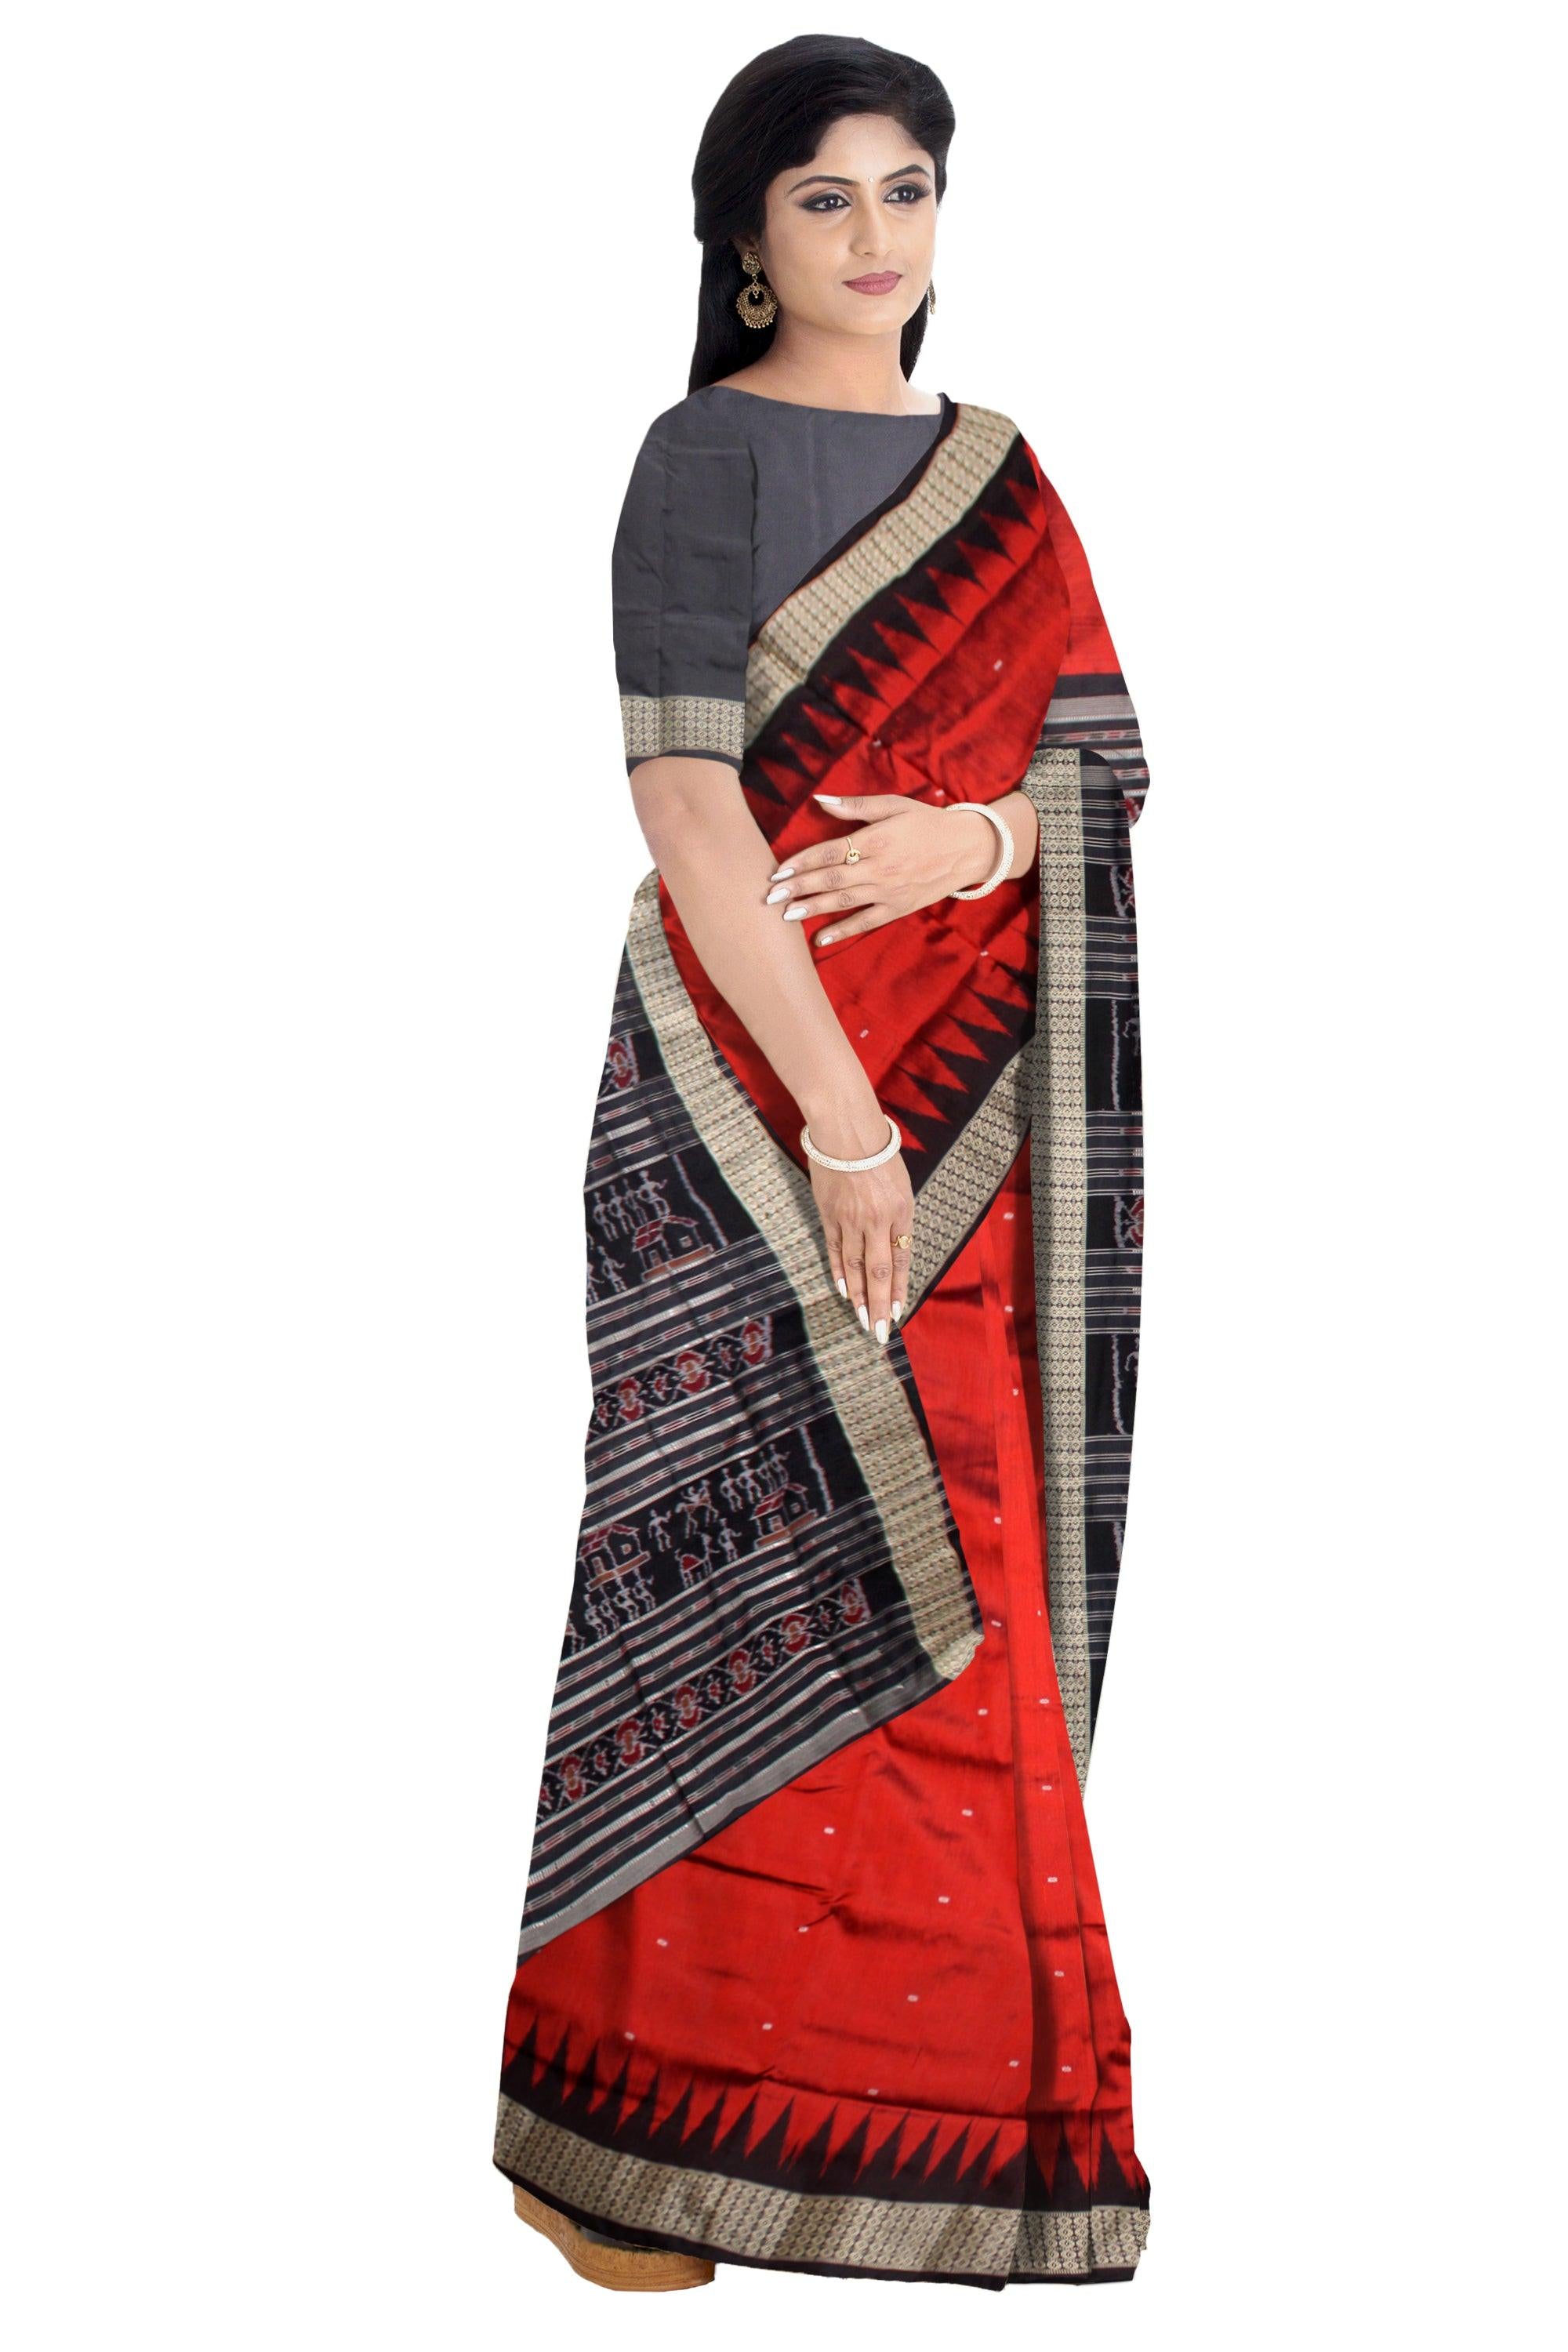 SONEPUR PURE SILK SAREE IN MAROON AND BLACK COLOR IN BOOTY DESIGN WITH SILVER COLOR BORDER WITH BLOUSE PIECE. - Koshali Arts & Crafts Enterprise